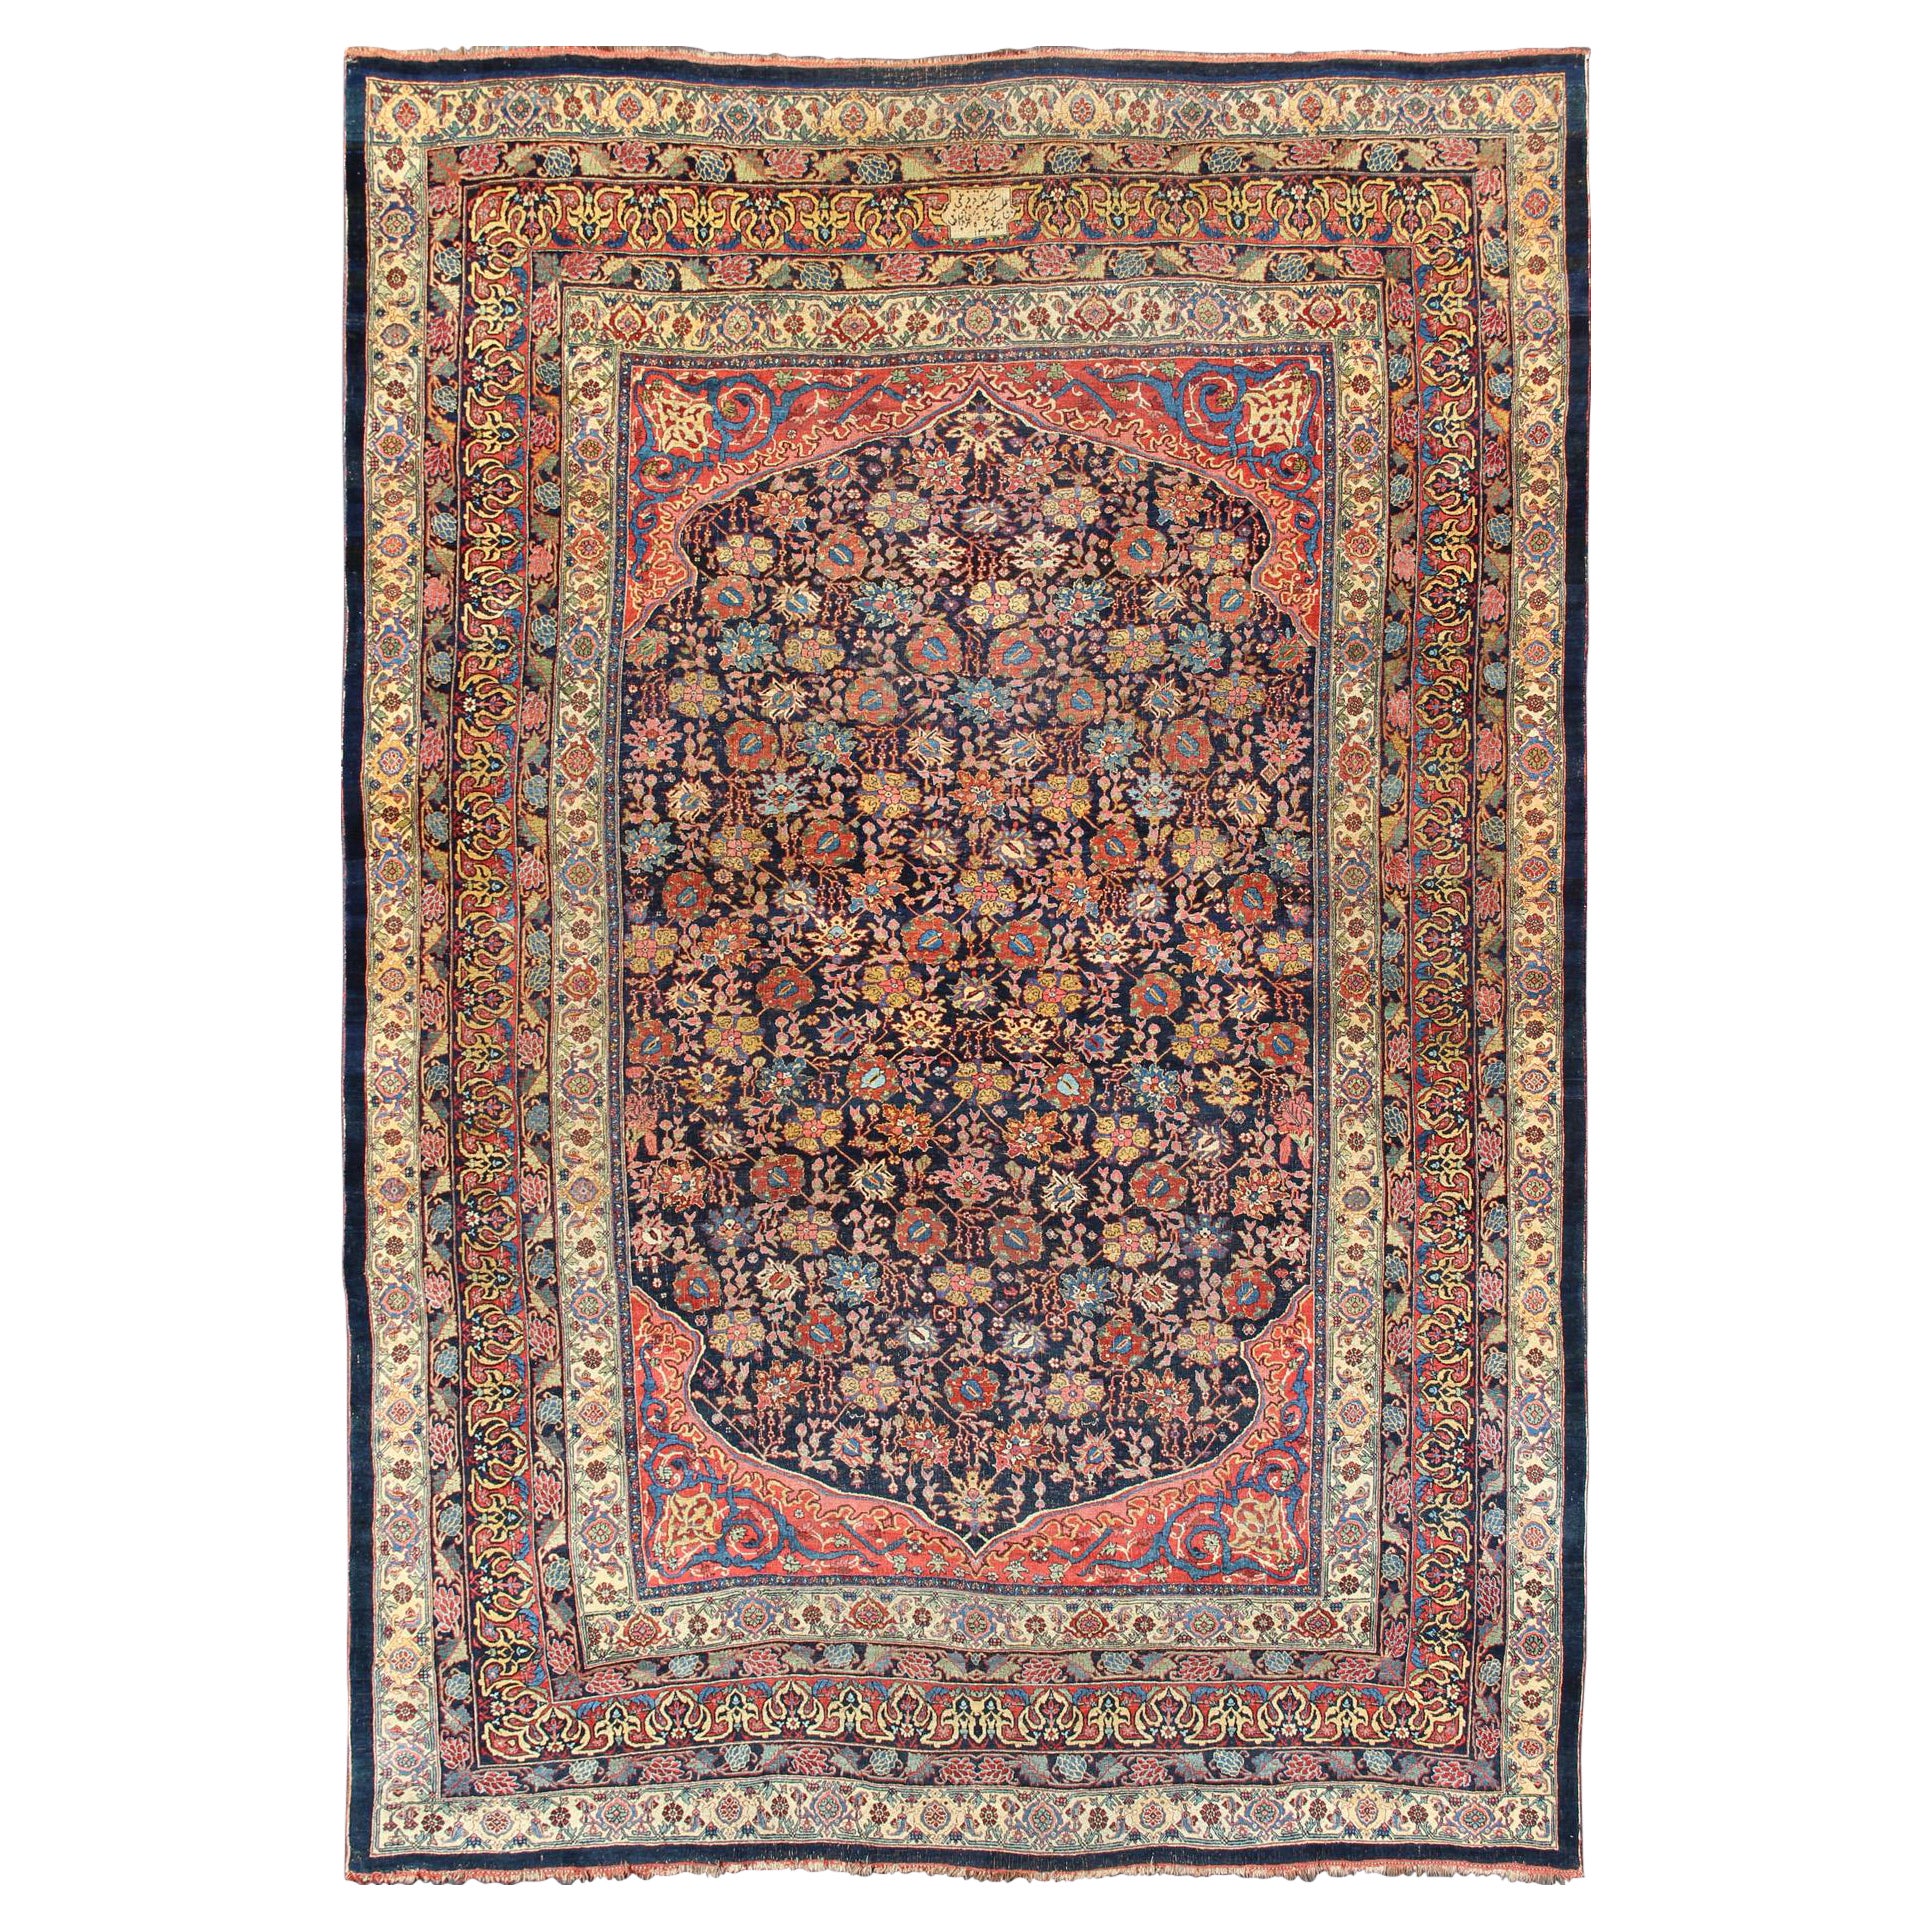 Large Antique Persian Bidjar Rug with All-Over colorful Florals & Navy Field